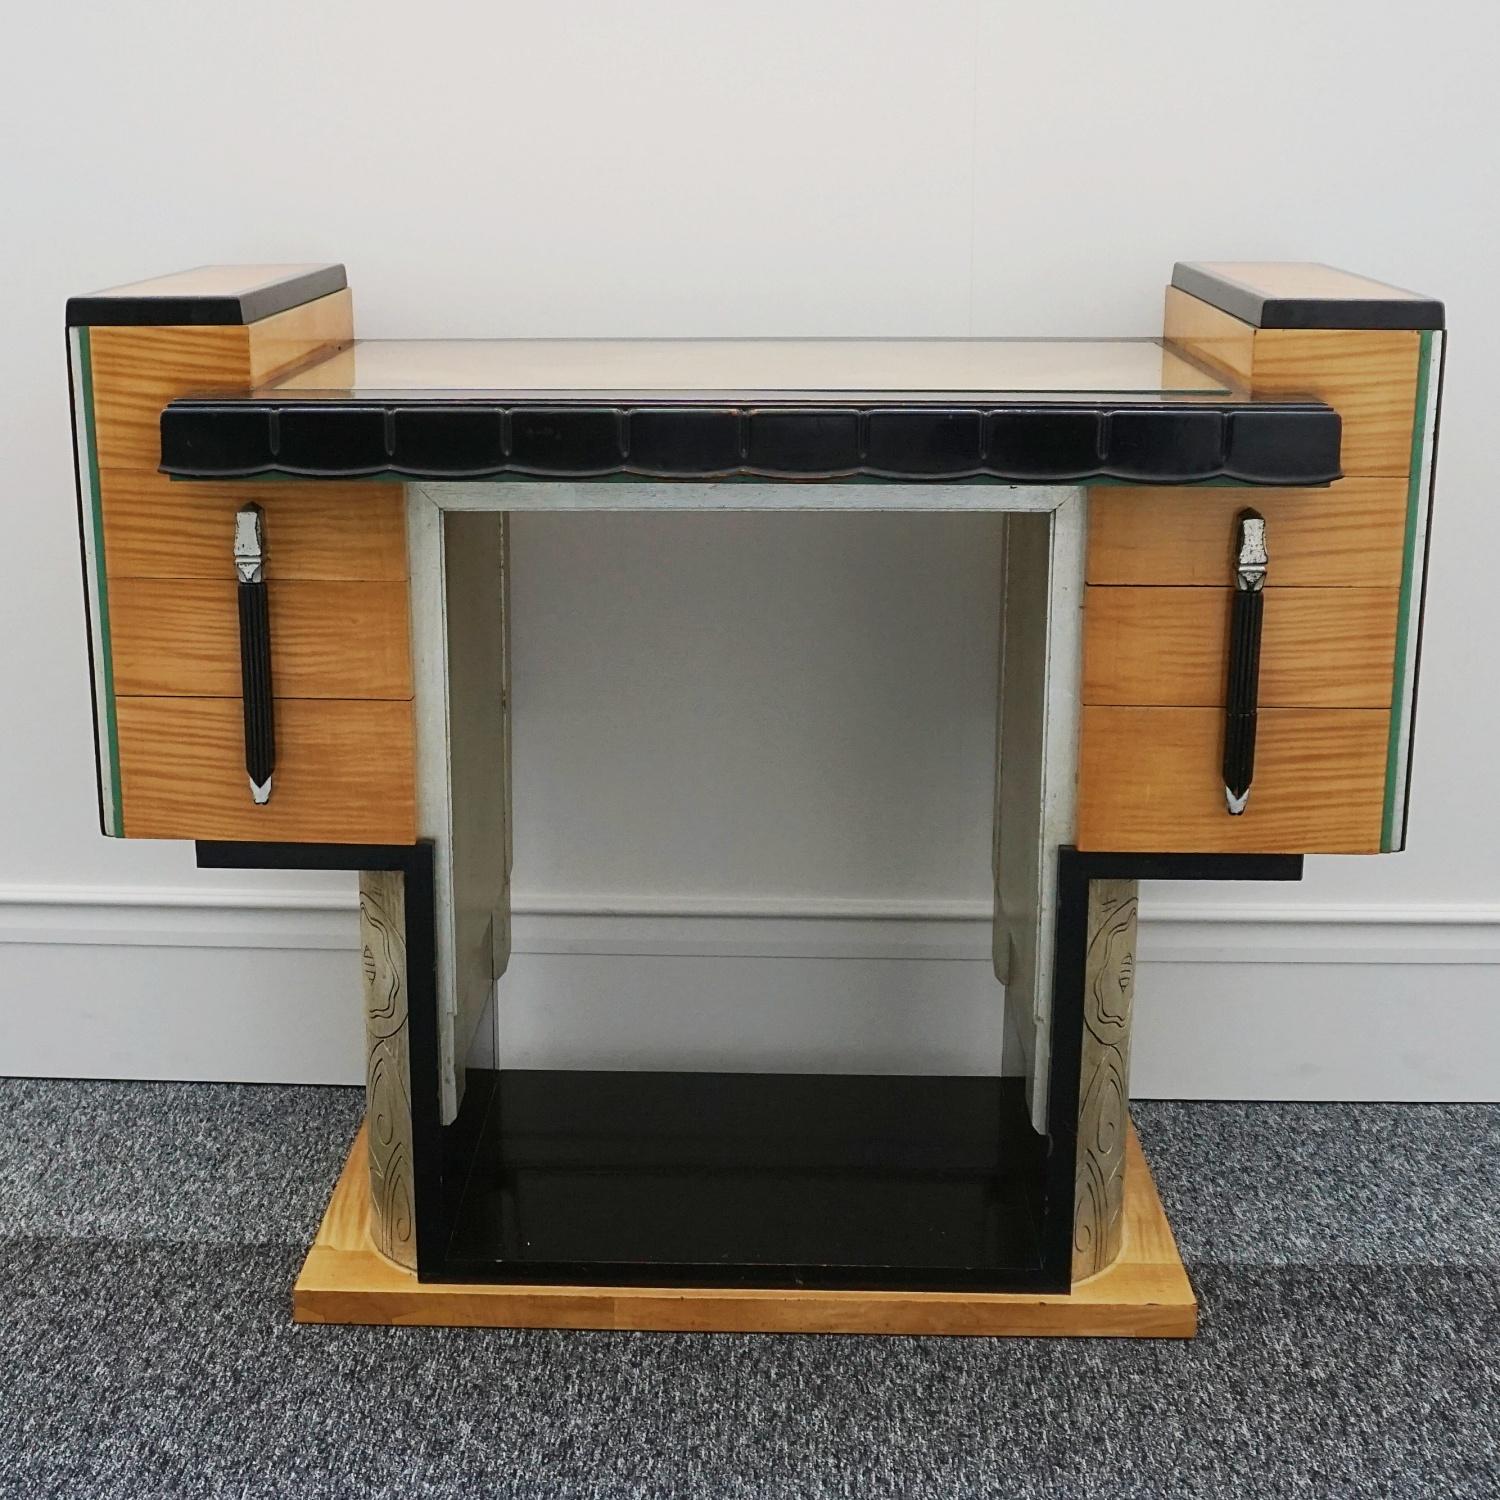 English Art Deco Console Table by Serge Chermayeff for Waring & Gillows circa 1935 For Sale